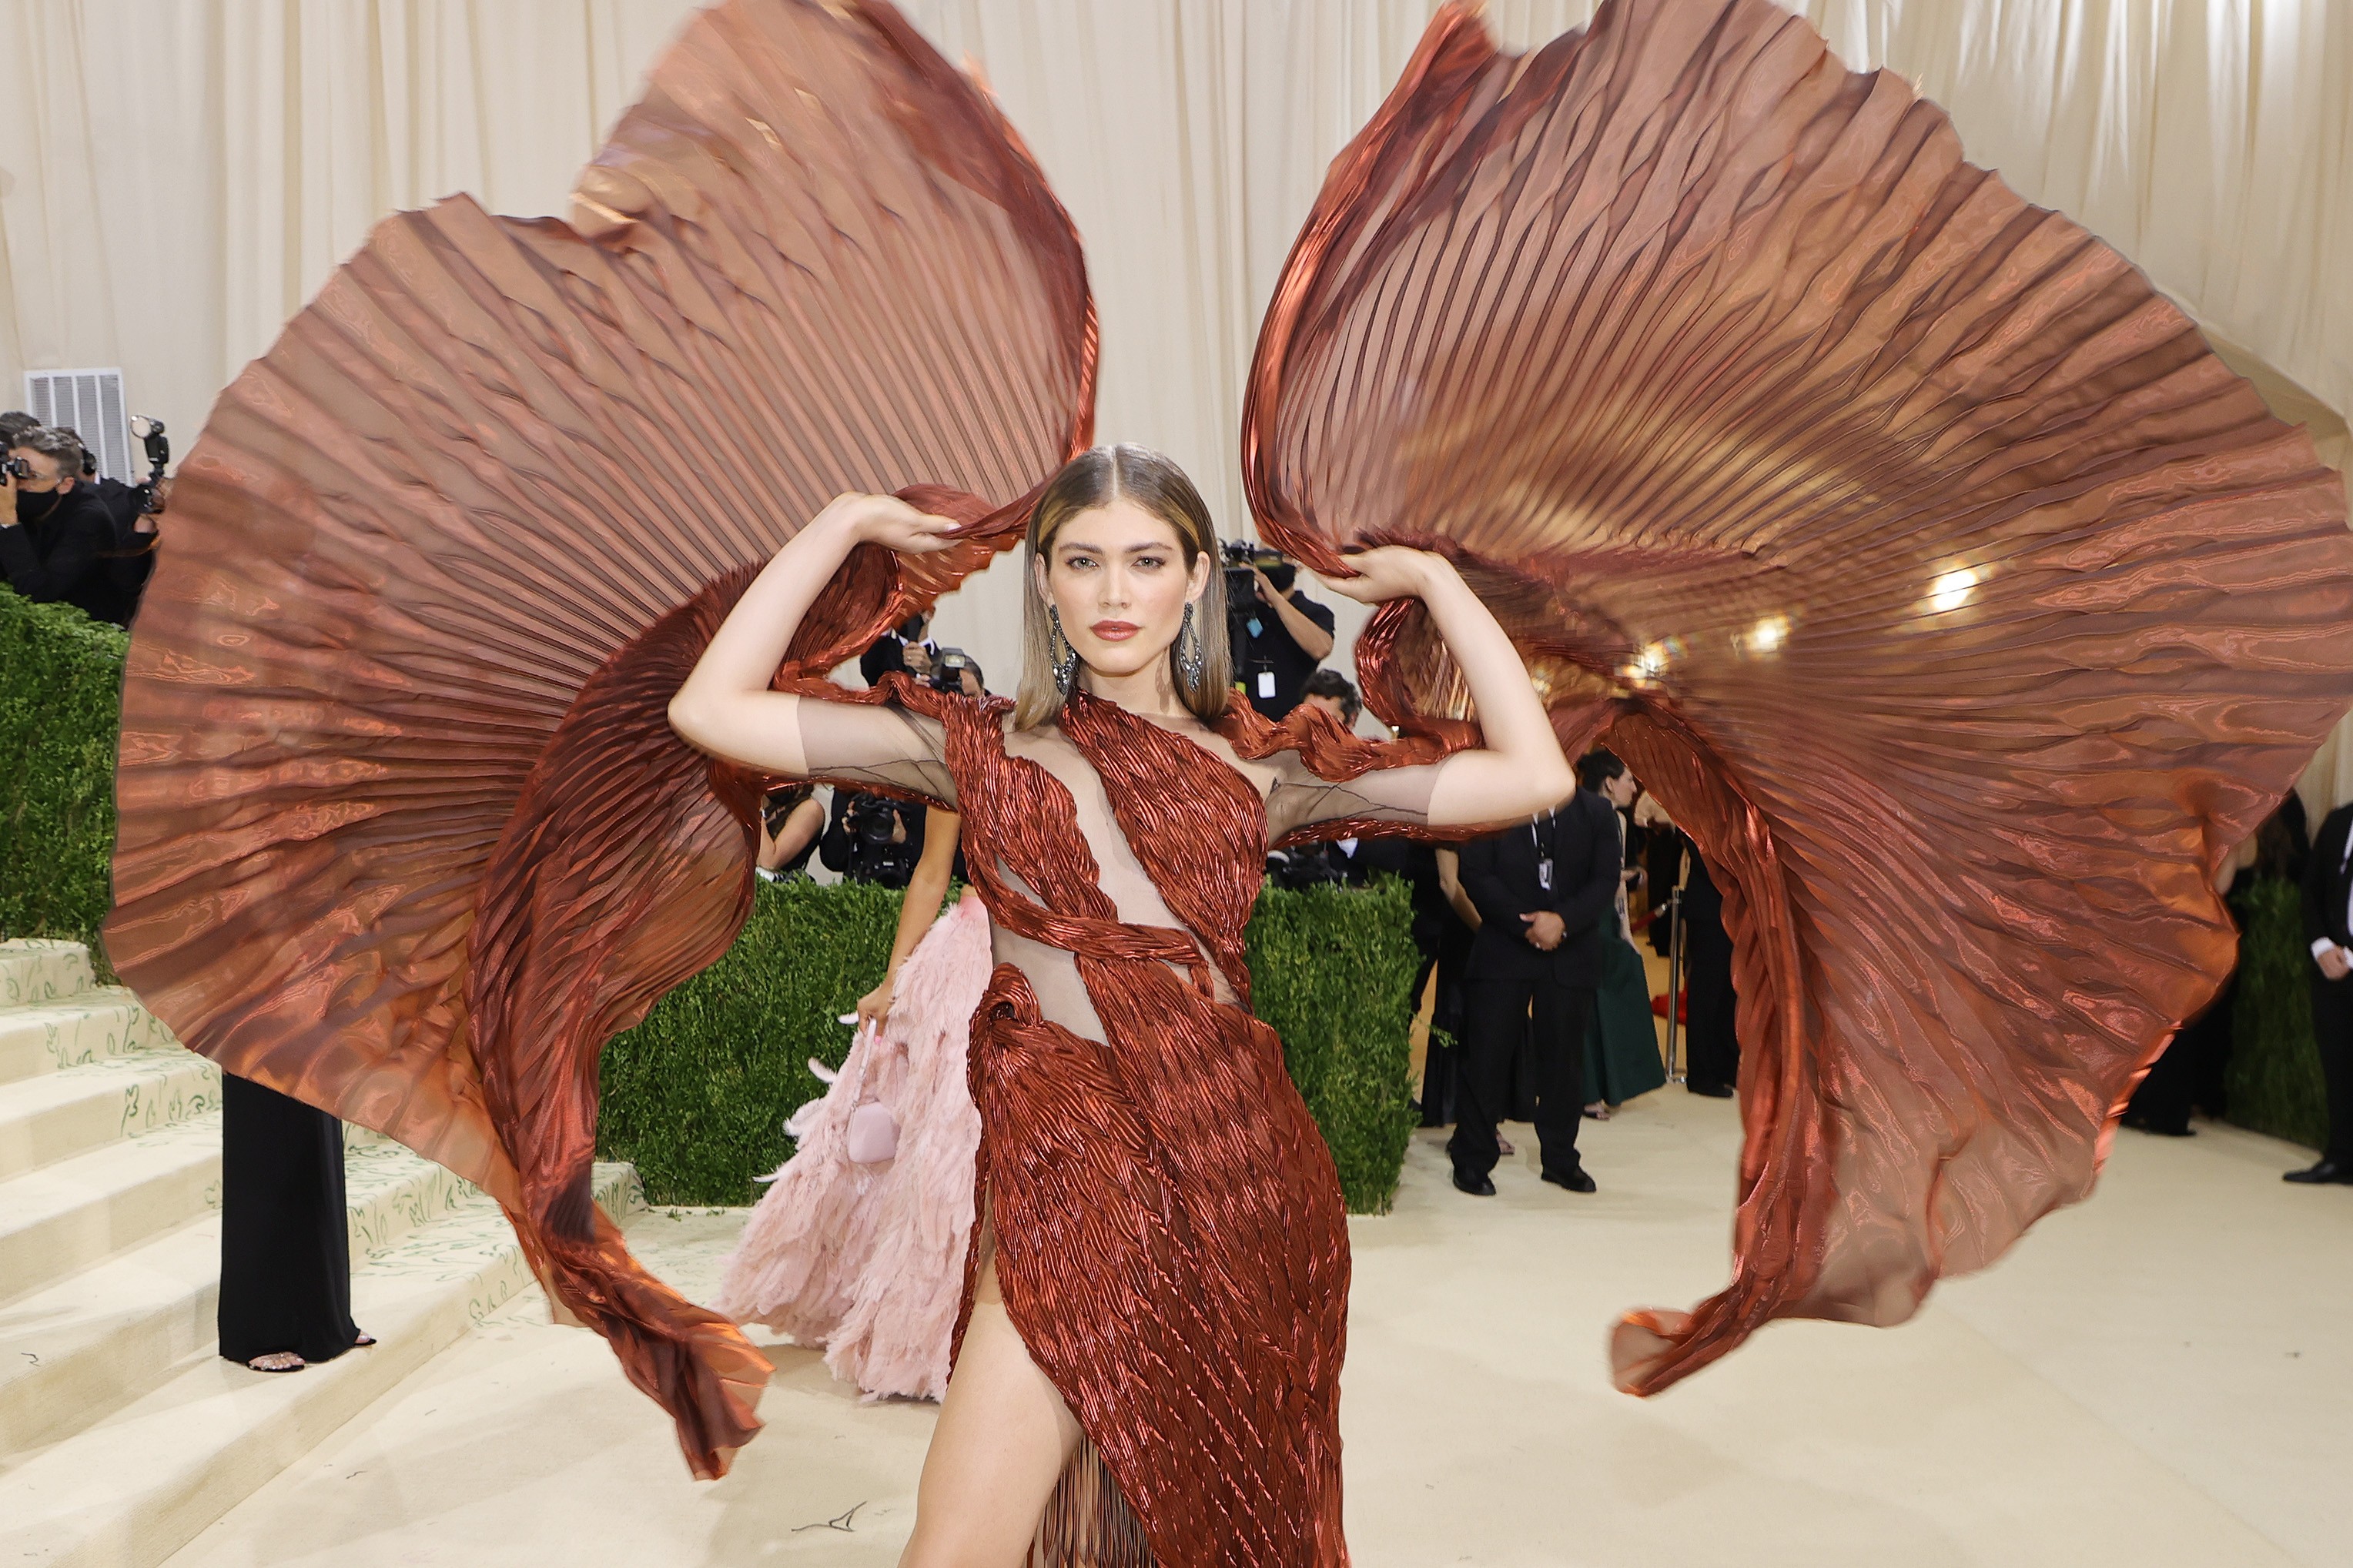 NEW YORK, NEW YORK - SEPTEMBER 13: Valentina Sampaio attends The 2021 Met Gala Celebrating In America: A Lexicon Of Fashion at Metropolitan Museum of Art on September 13, 2021 in New York City. (Photo by Mike Coppola/Getty Images) (Foto: Getty Images)